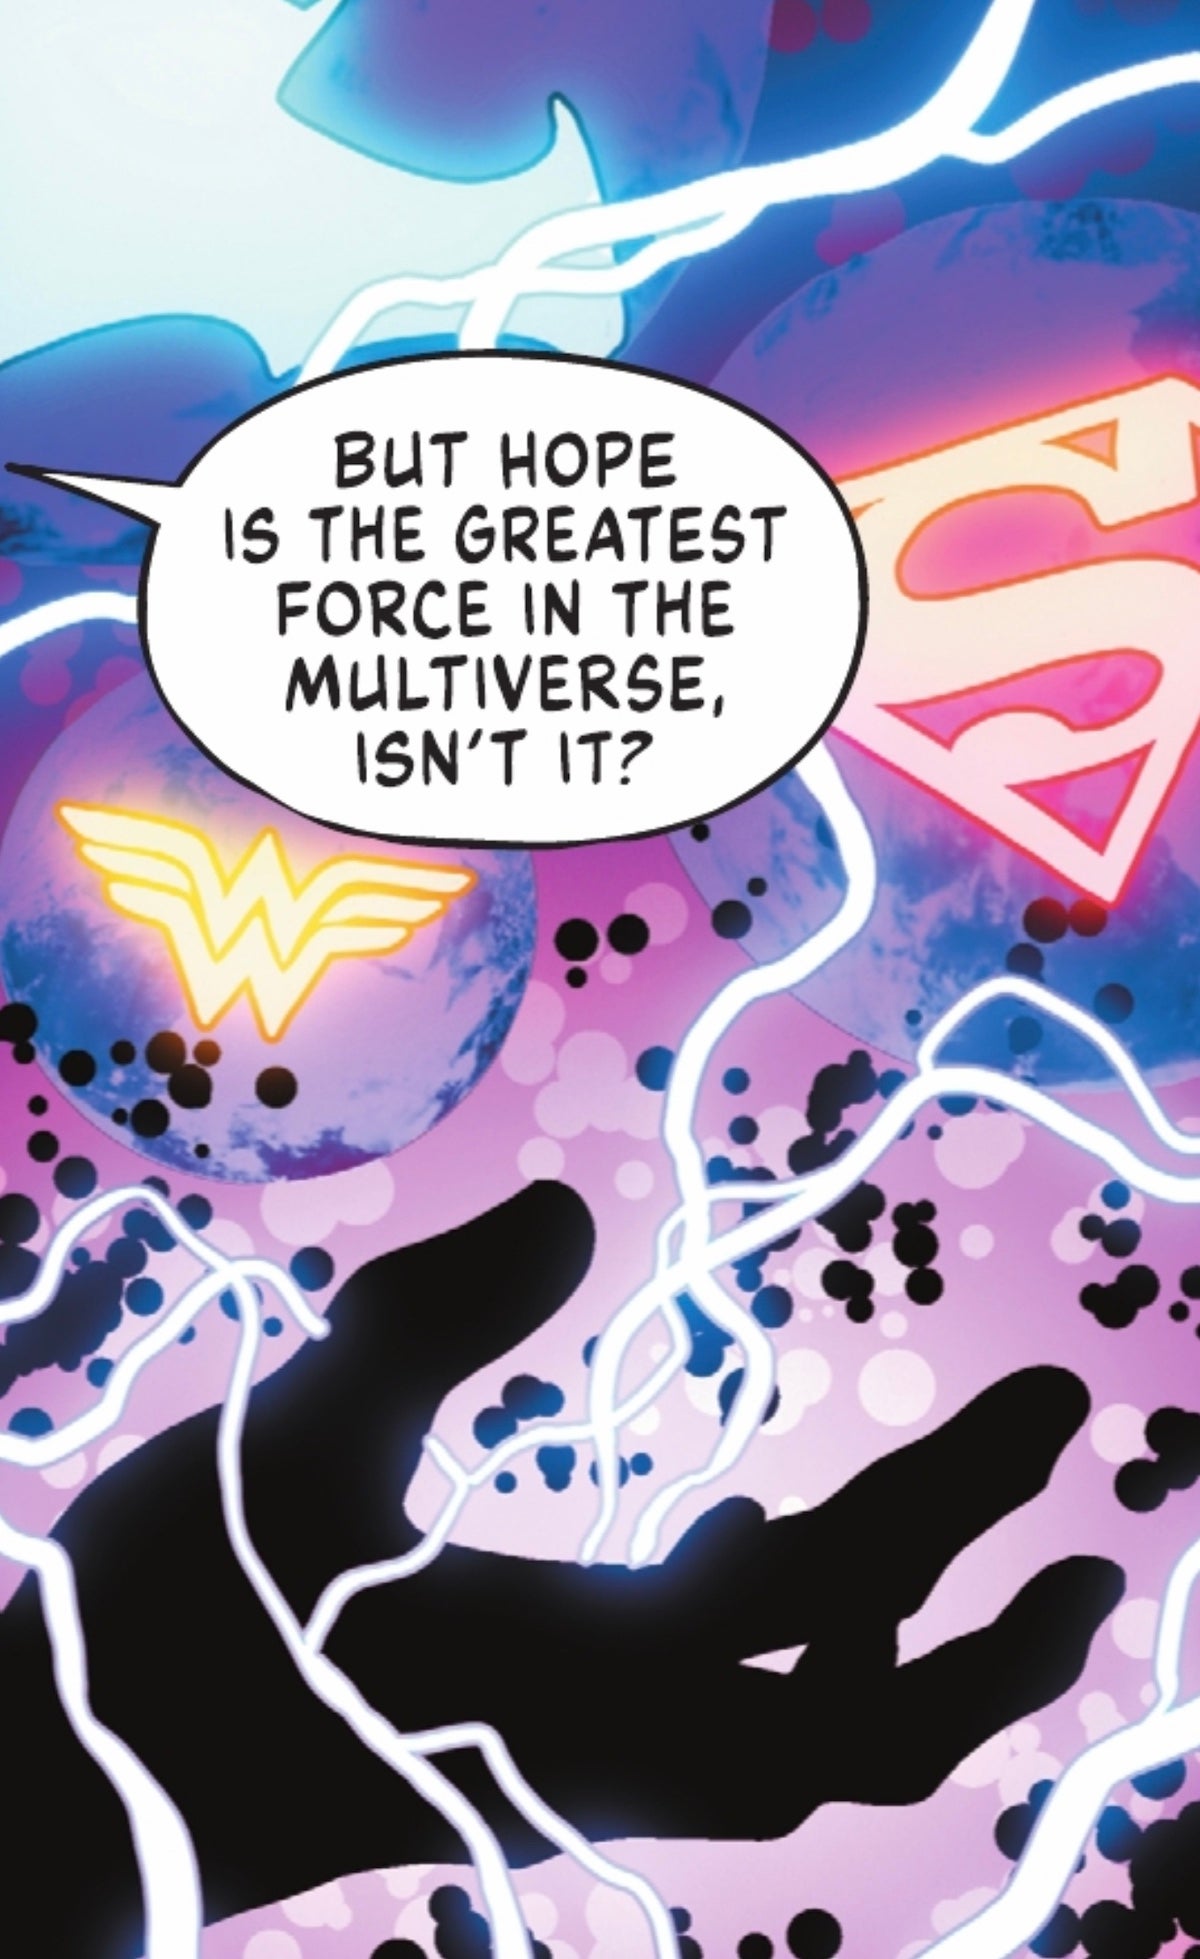 Interior panel with a sillouette of a hand, underneath the Wonder Woman, Superman, and Batman logos that reads: But hope is the greatest force in the multiverse, isn't it?